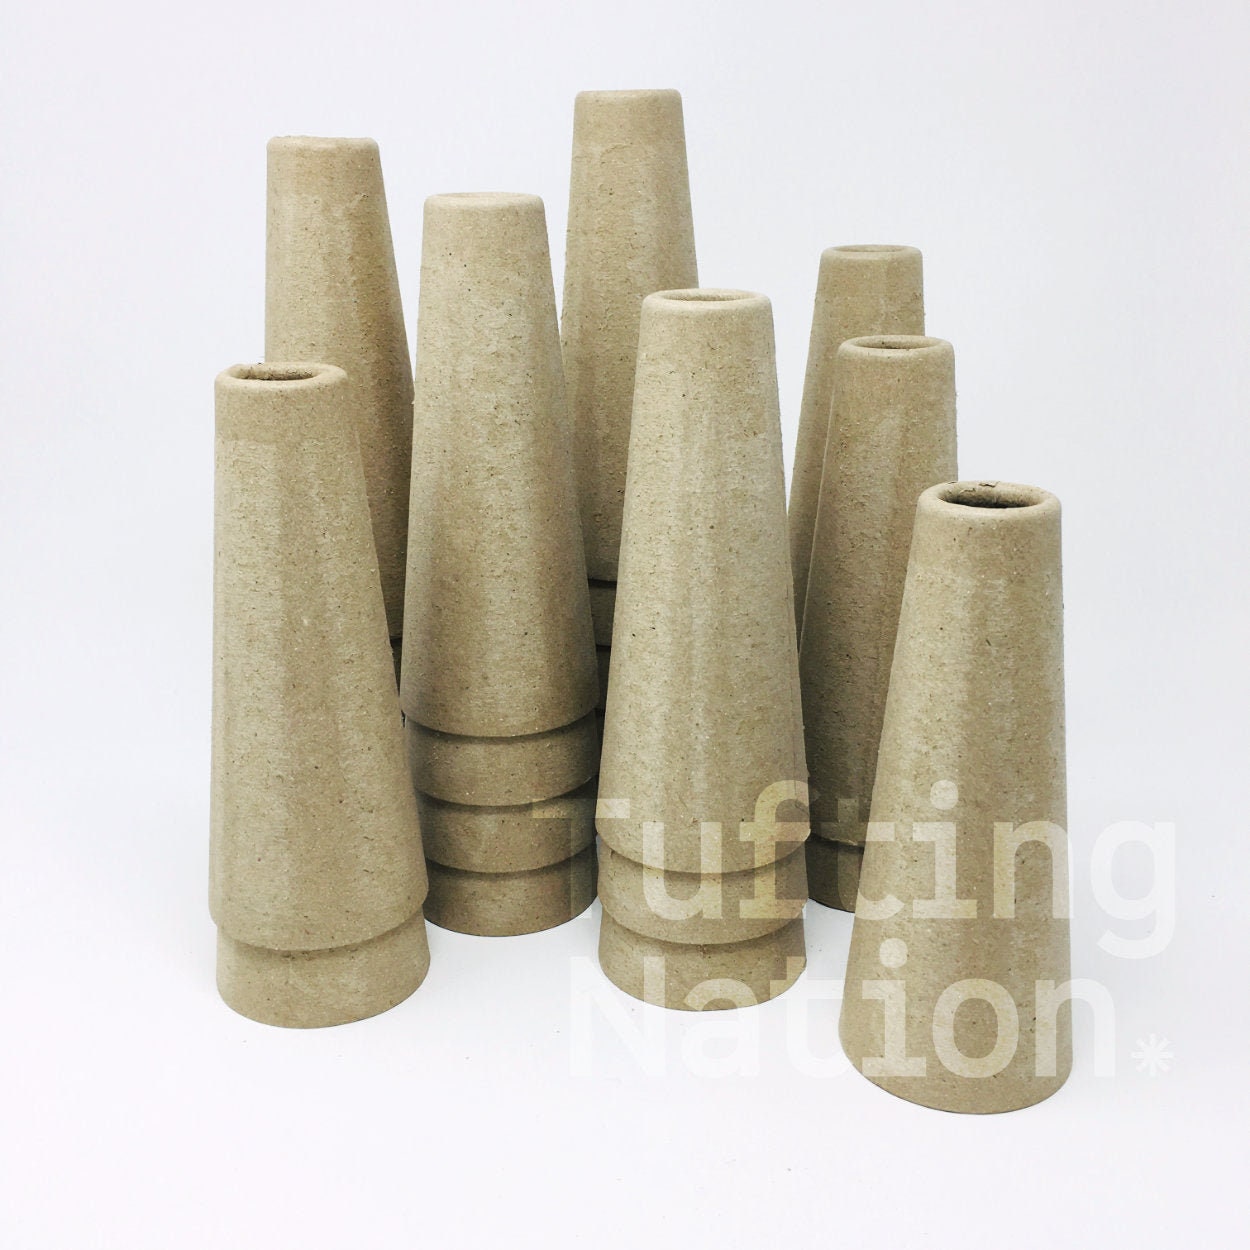 SALE!Bent tips/bottoms Paper Mache Cones Open Bottom 13.75 X 5 Inches 10  Large